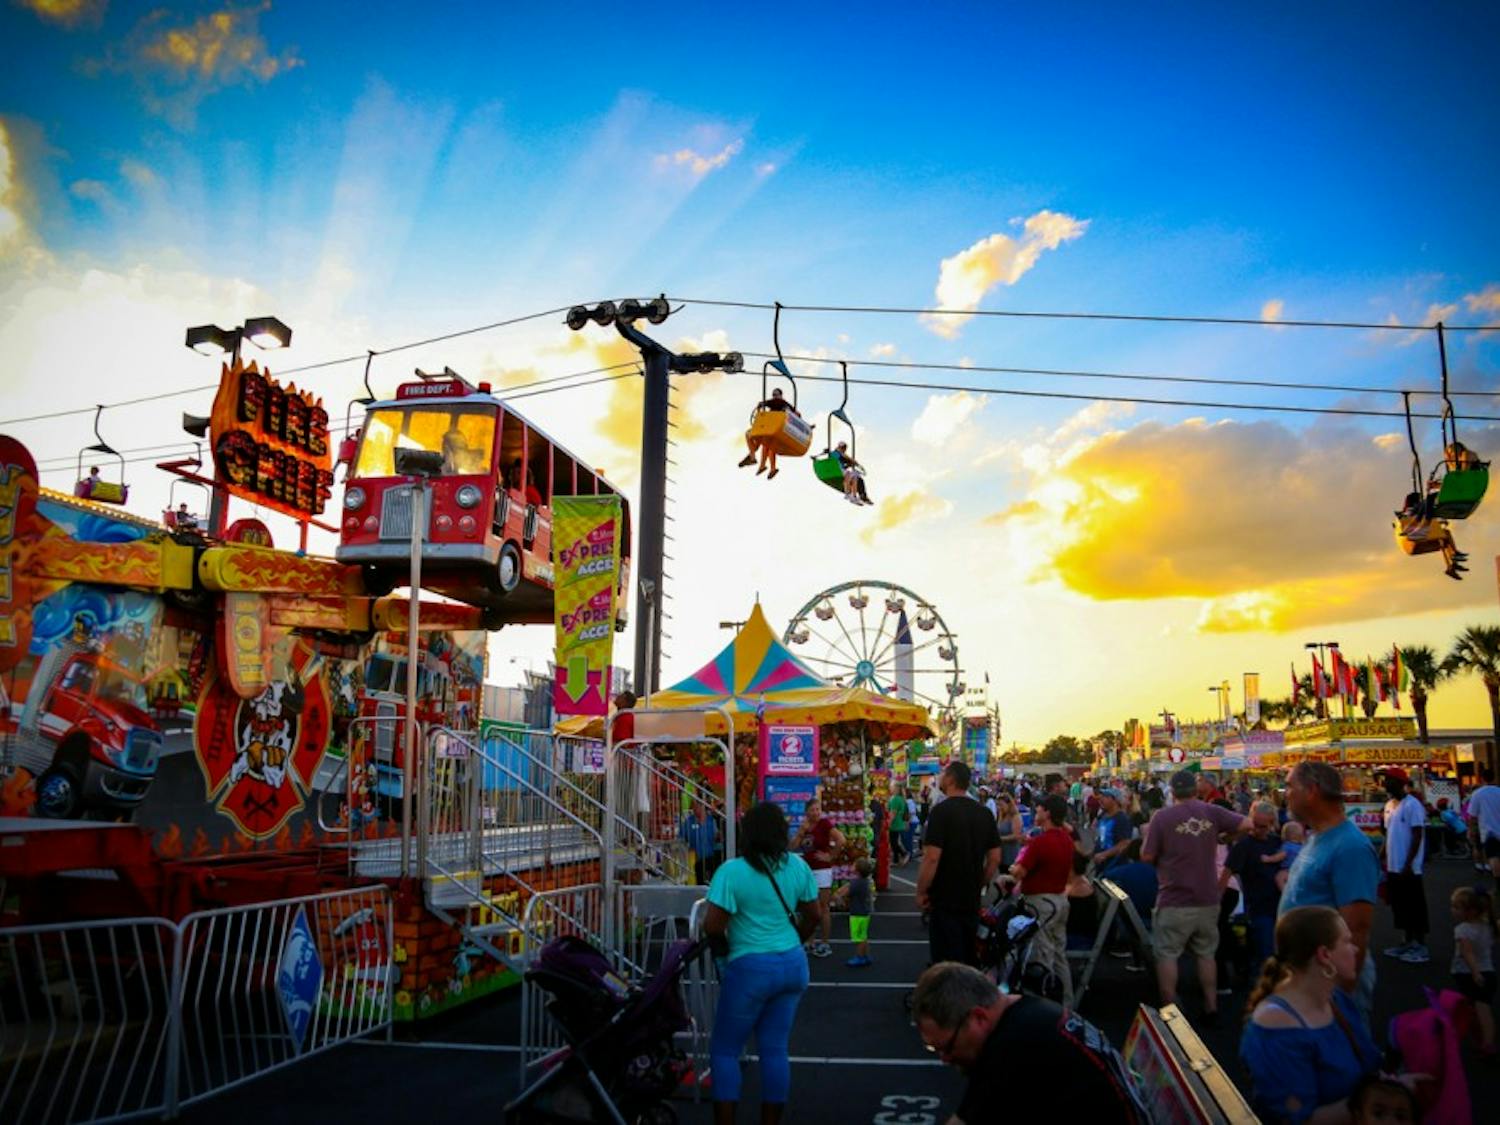 The sun sets on College Day at the 2018 South Carolina State Fair.